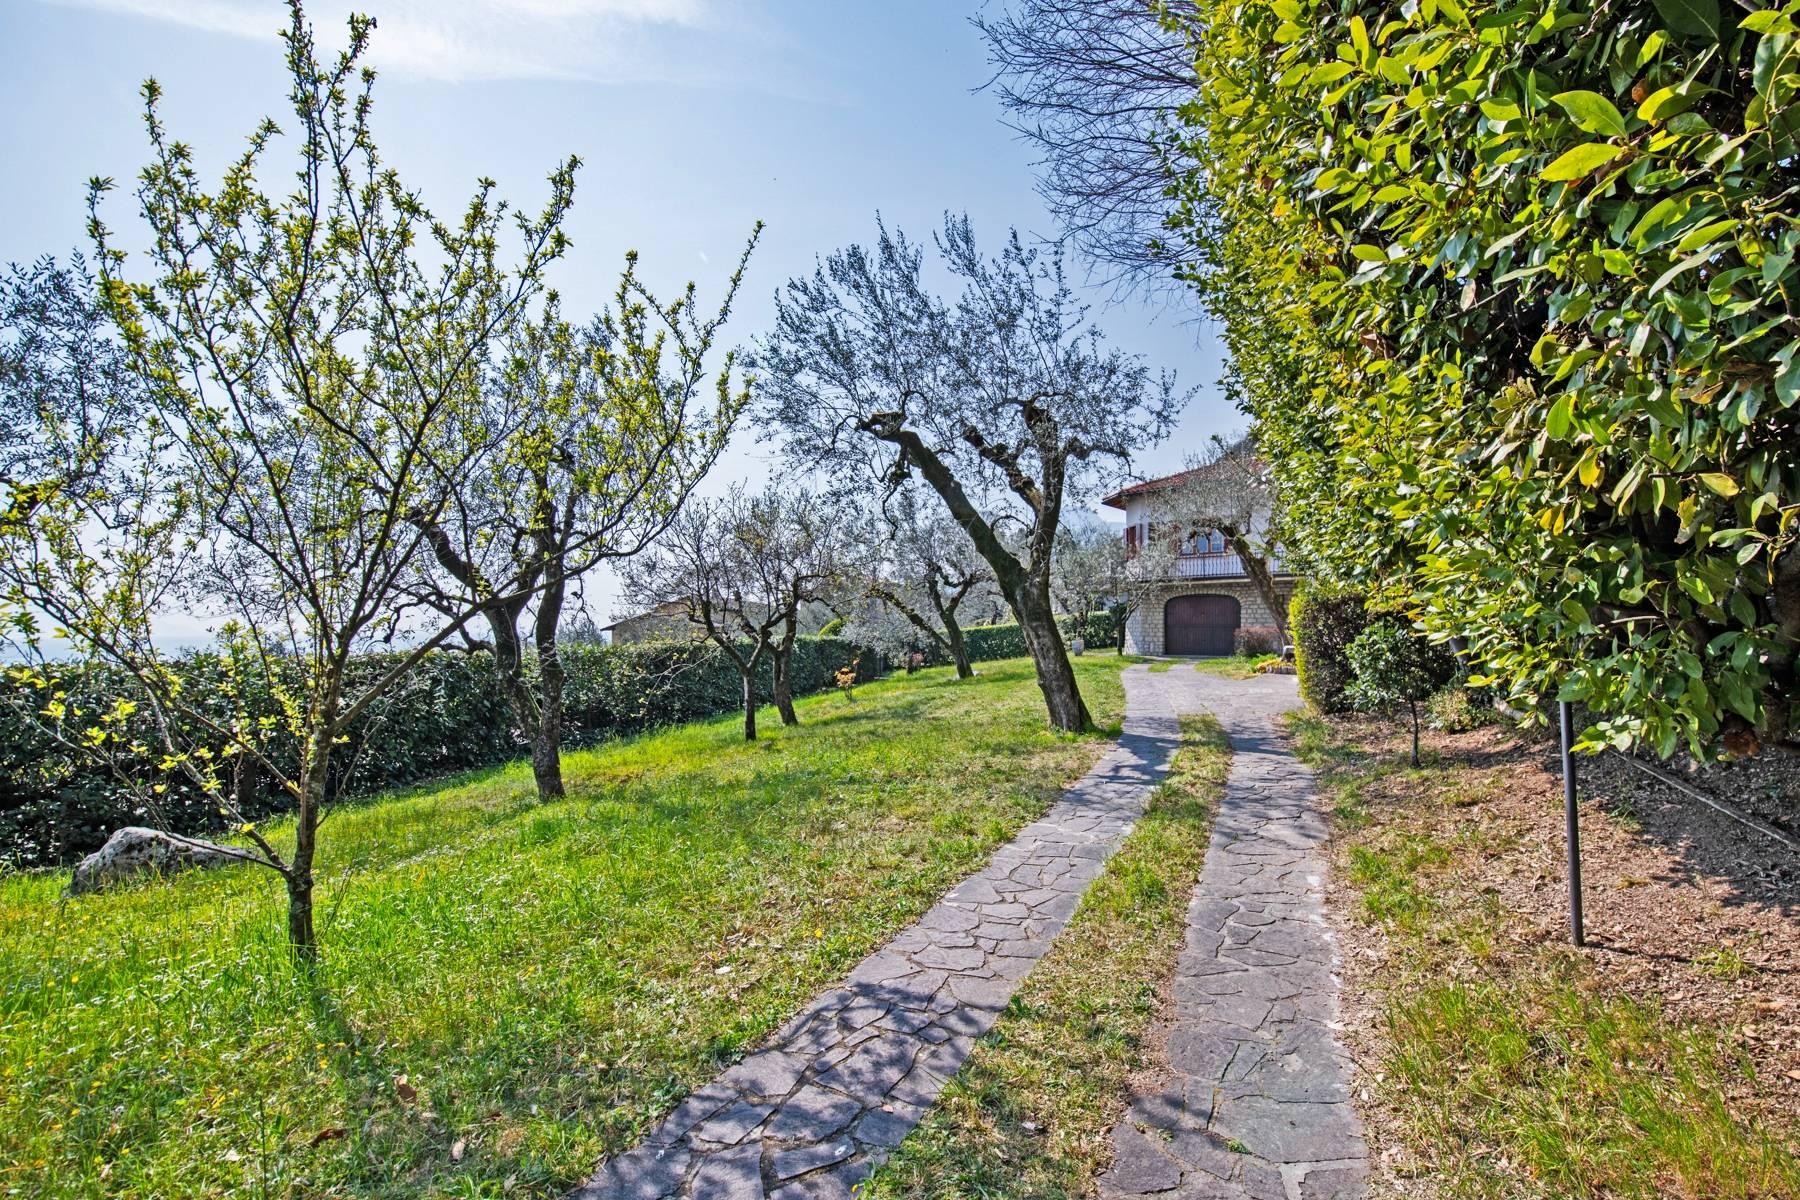 Villa with lake view in Gargnano surrounded by olive trees - 34